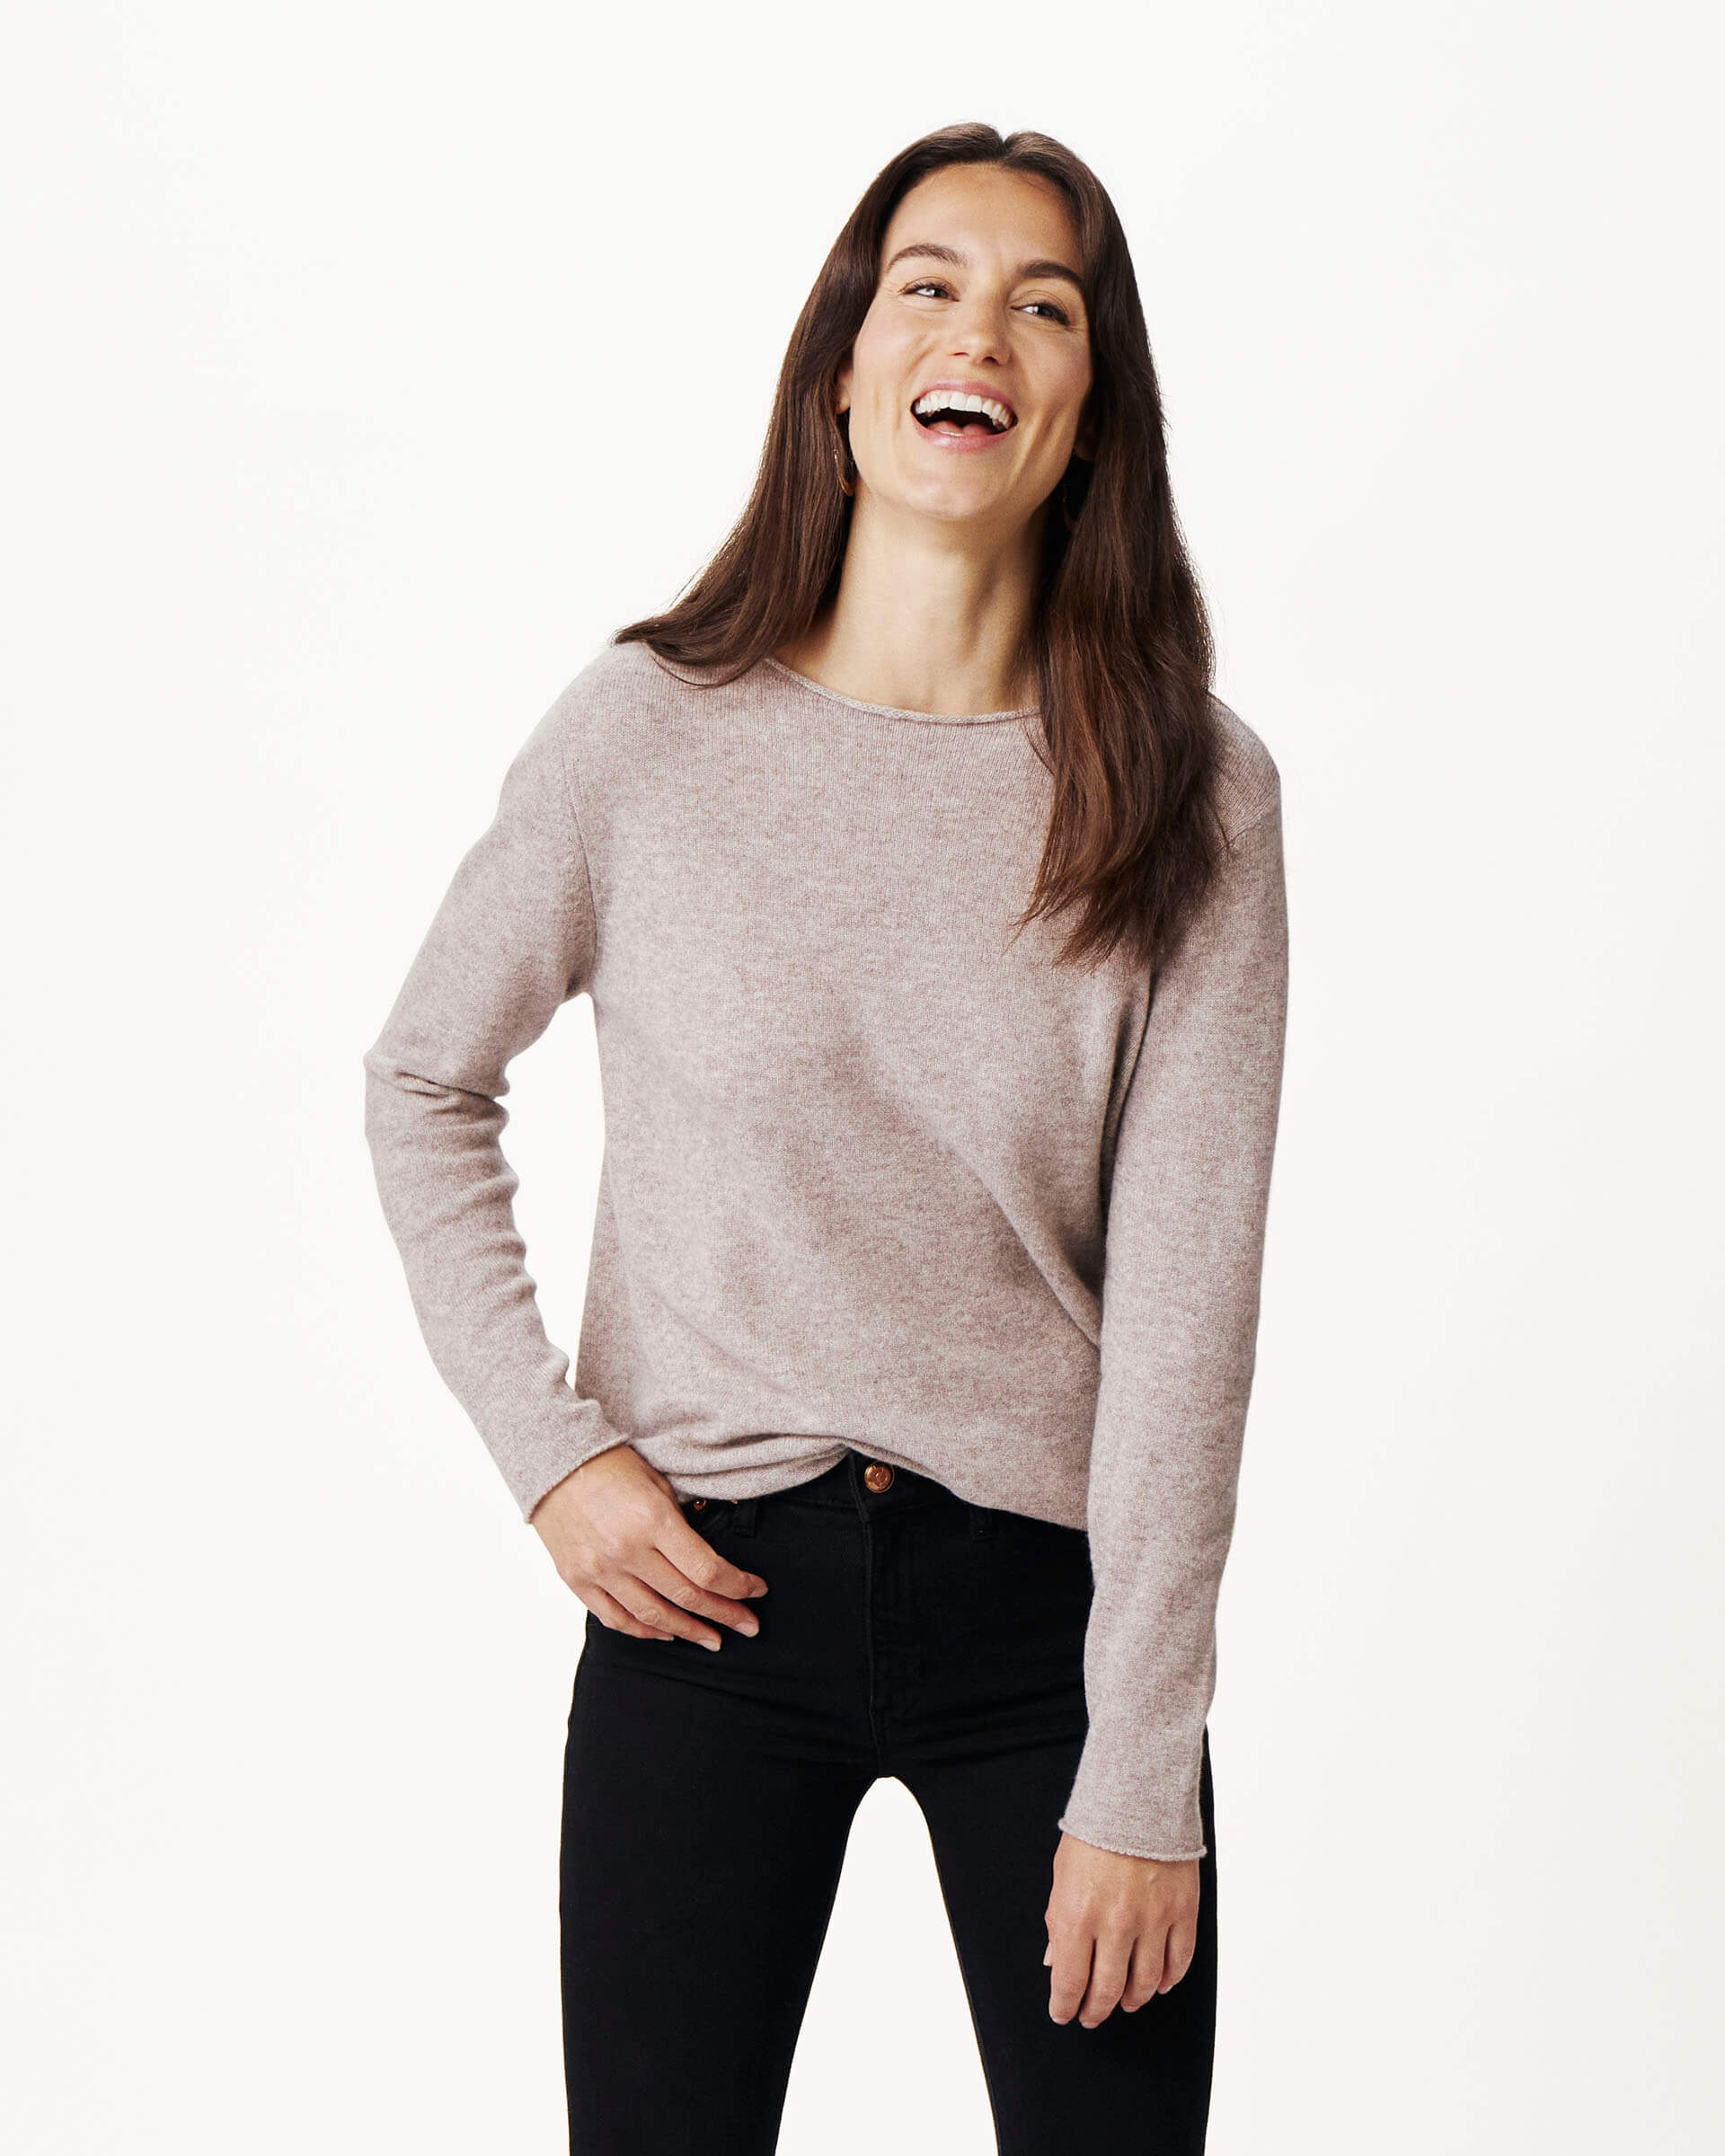 brunette female wearing light brown sweater and laughing on a white background 